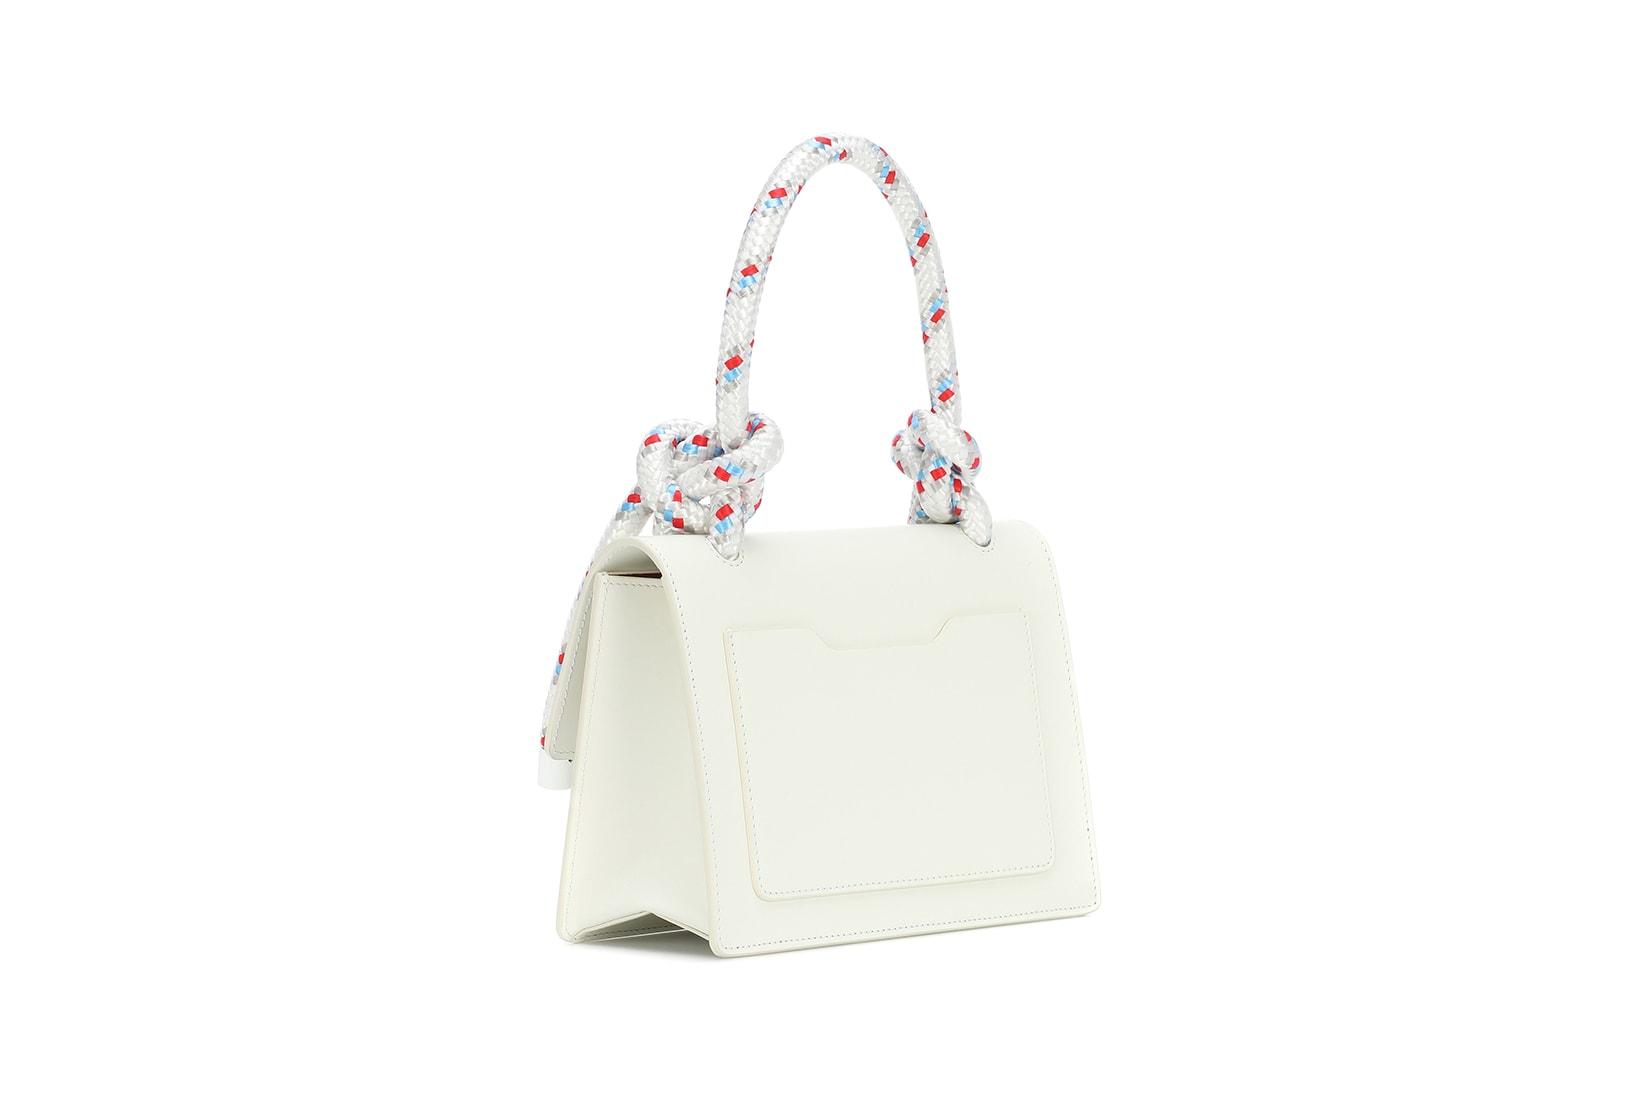 OFF-WHITE Gummy Jitney 1.4 Top Handle Bag in White